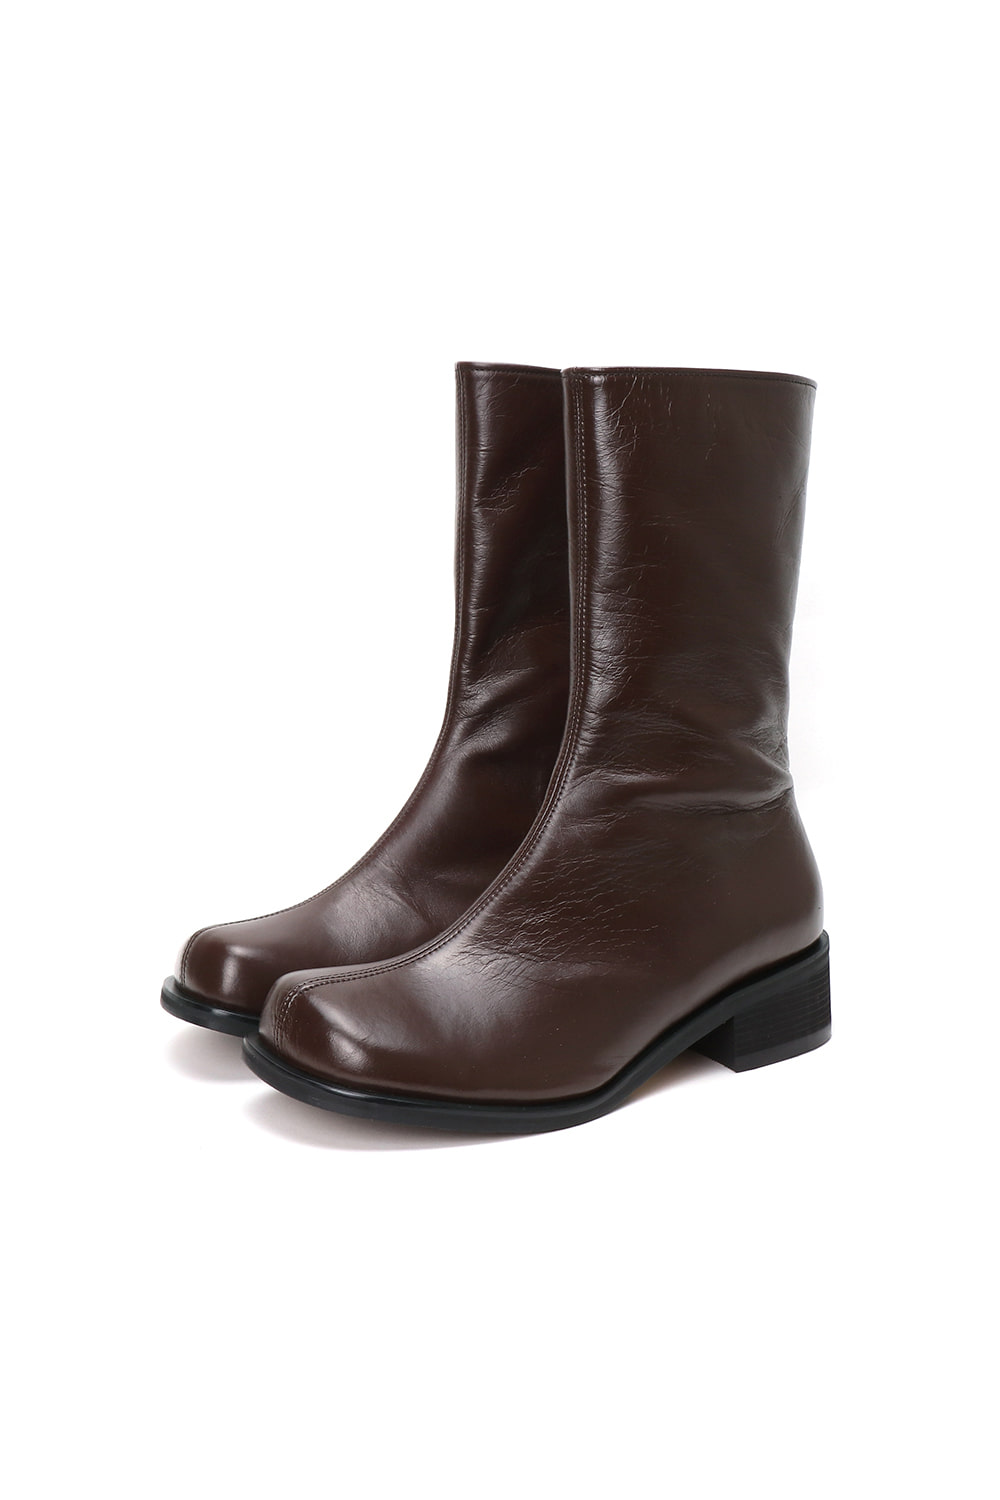 FAY MIDDLE BOOTS [MOCHA BROWN]